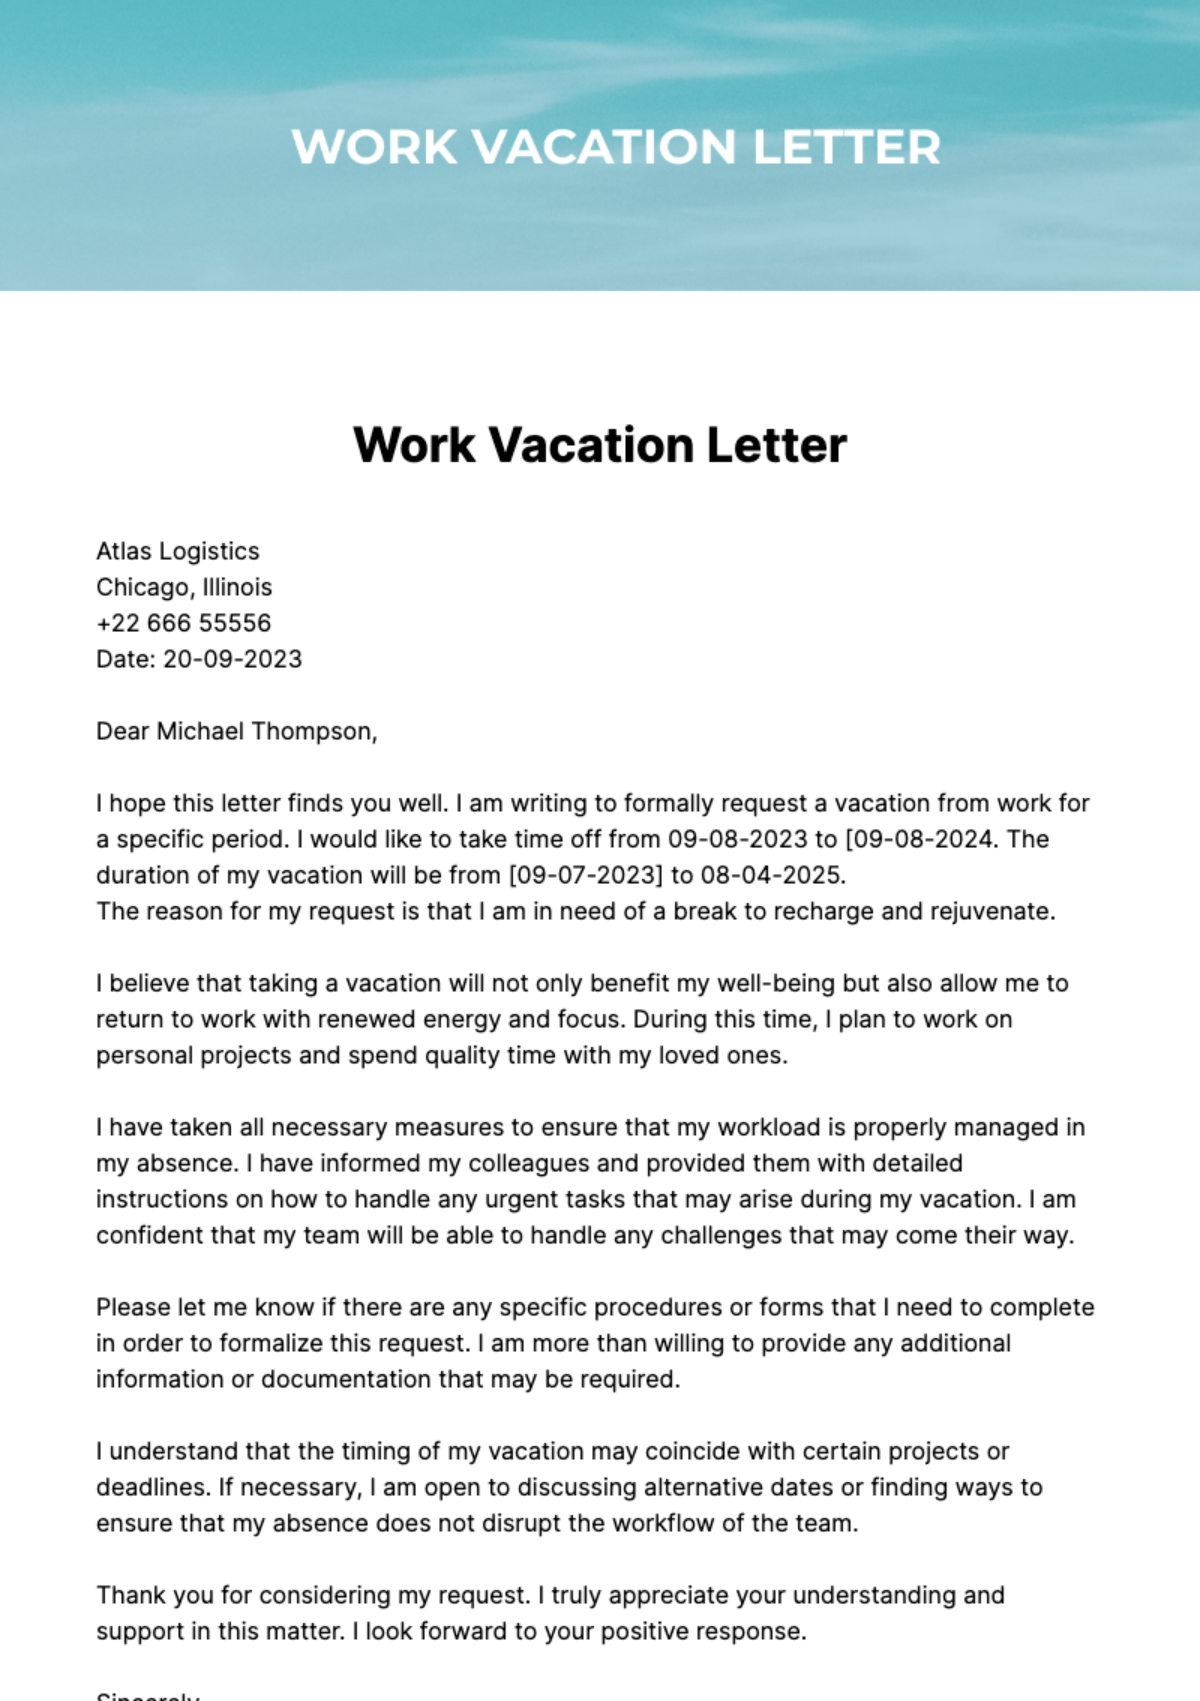 Free Work Vacation Letter Template